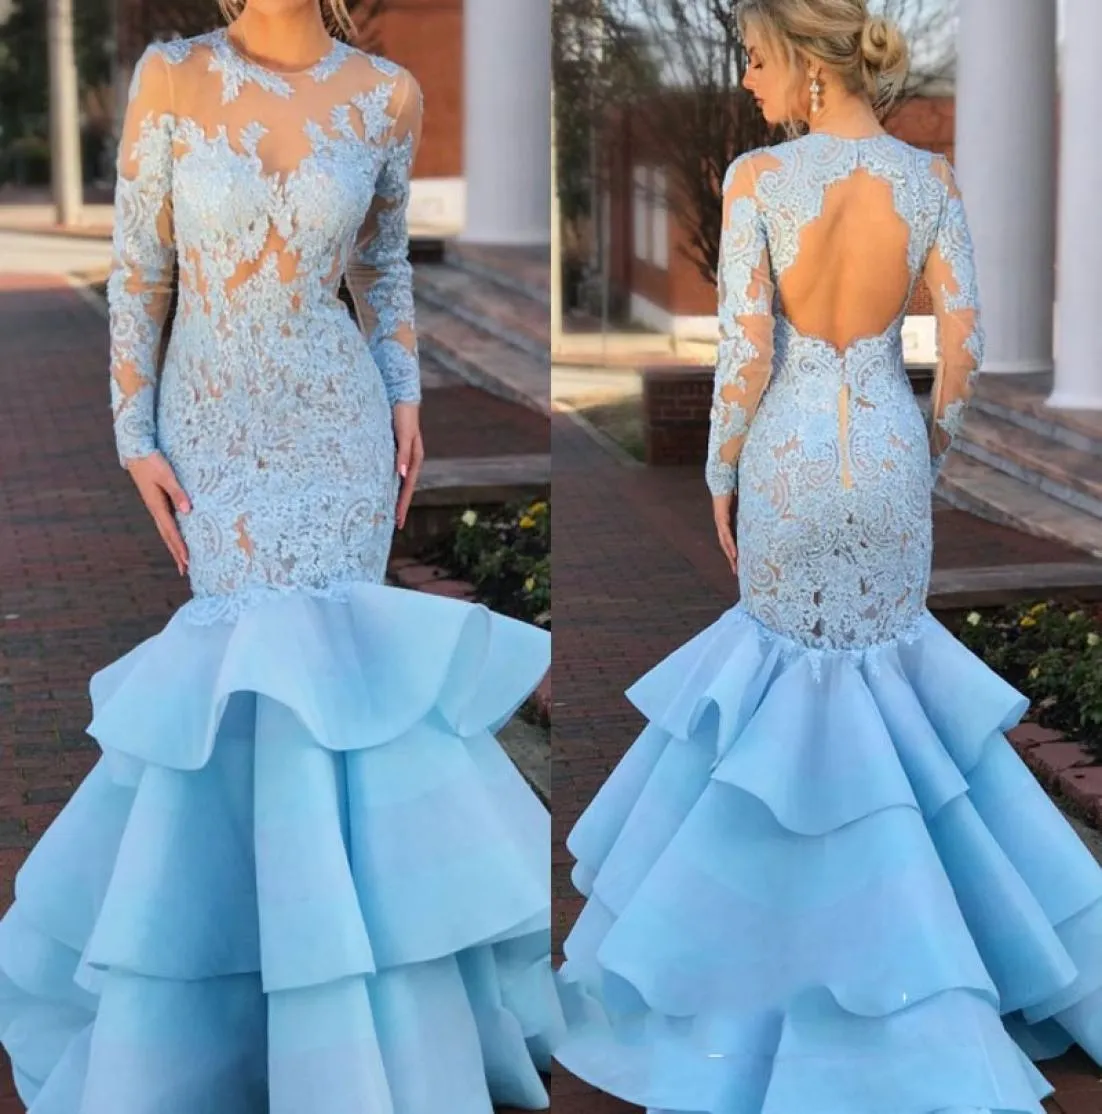 2019 Gorgeous Long Sleeve Mermaid Lace Prom Gown Sky Light Blue Tiered Ruffles Hollow Back Long Formal Evening Dresses Party Gown3916949